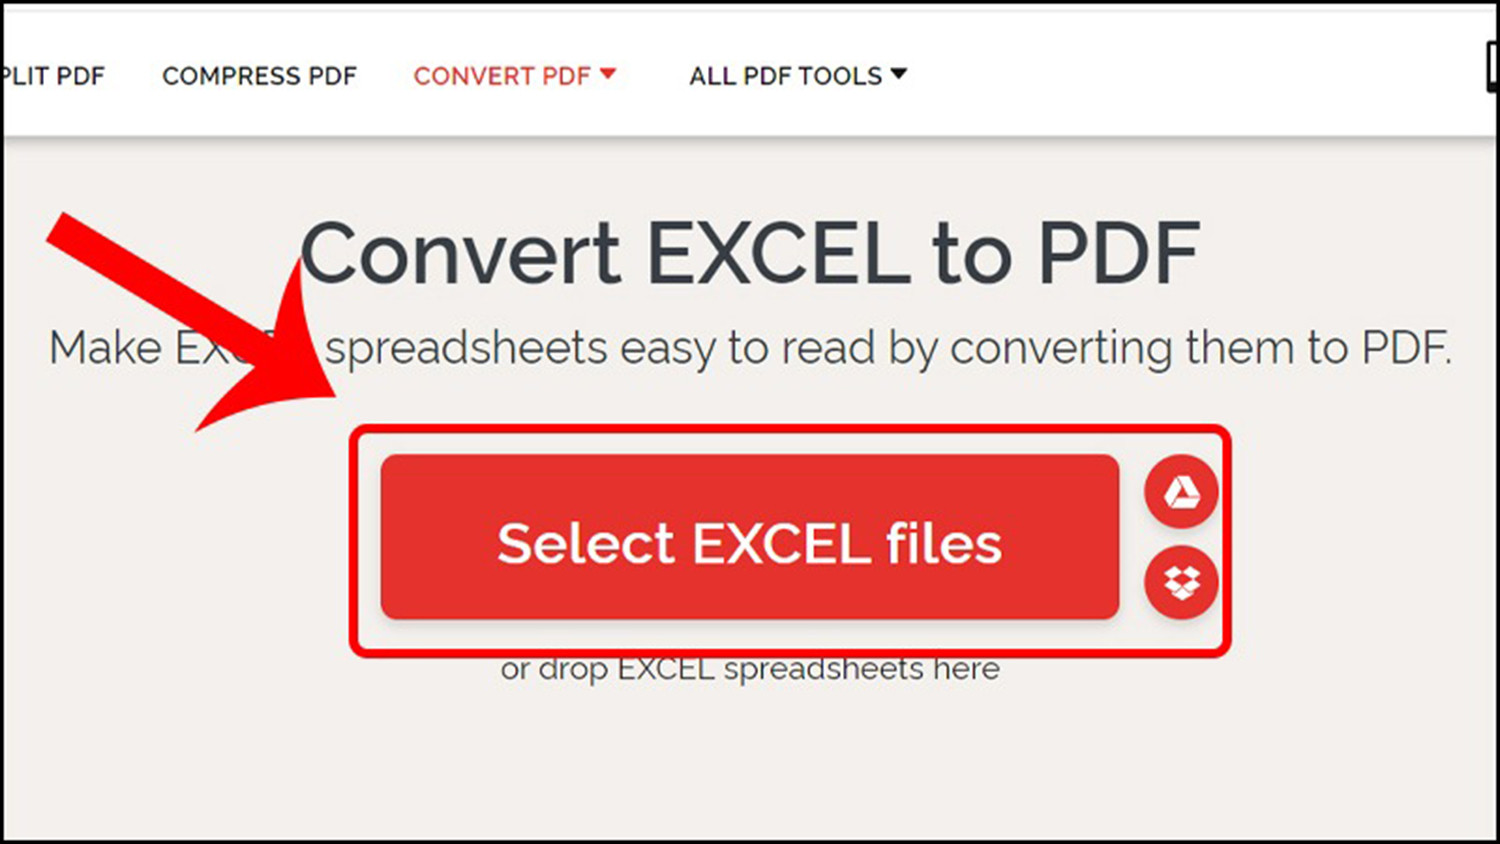 cach-chuyen-file-excel-sang-pdf-an-select-excel-files